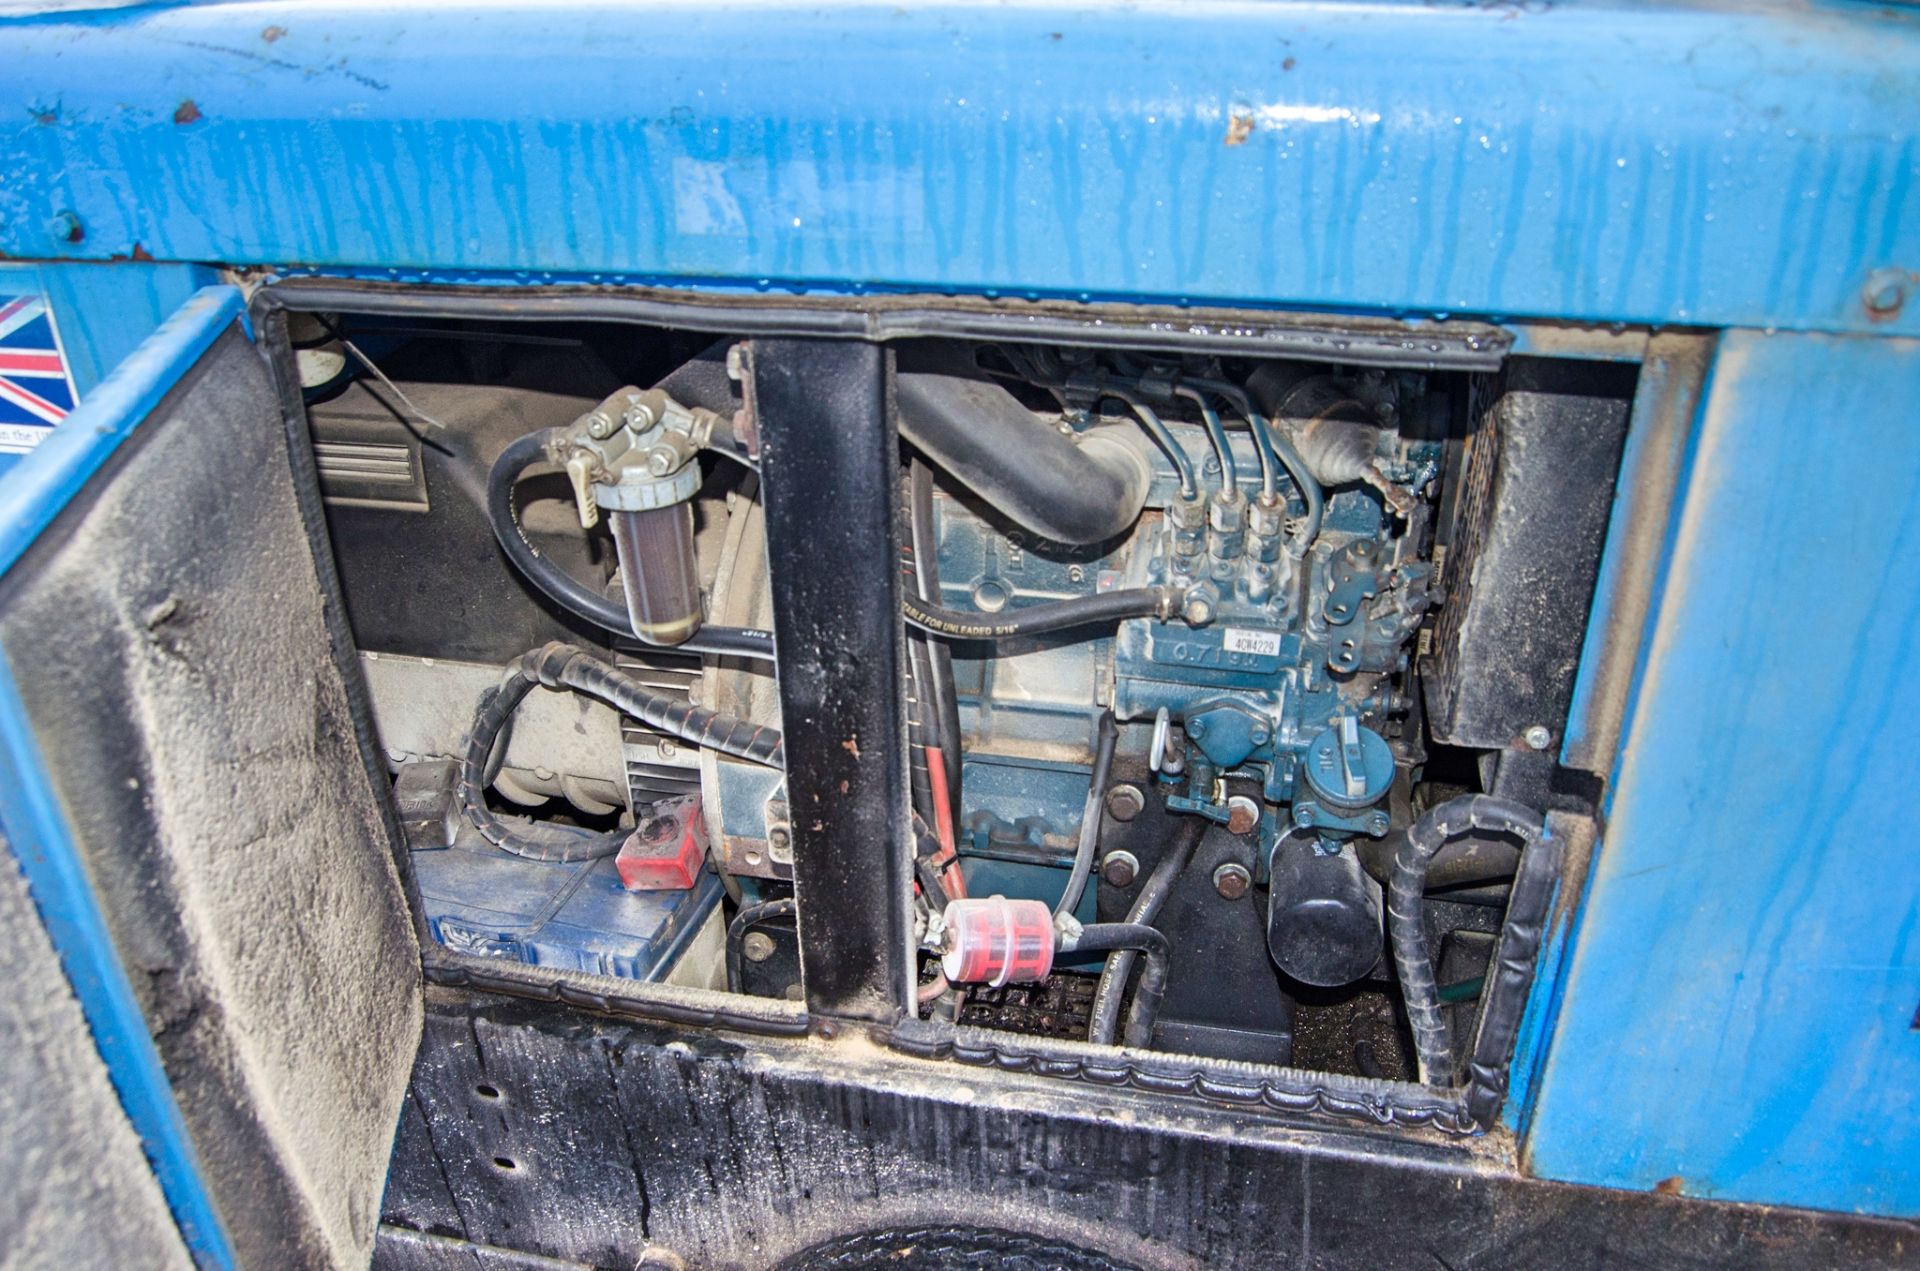 Stephill SSD1000 10 kva diesel driven generator S/N: 400704 Recorded Hours: 8147 GEN826 - Image 4 of 5